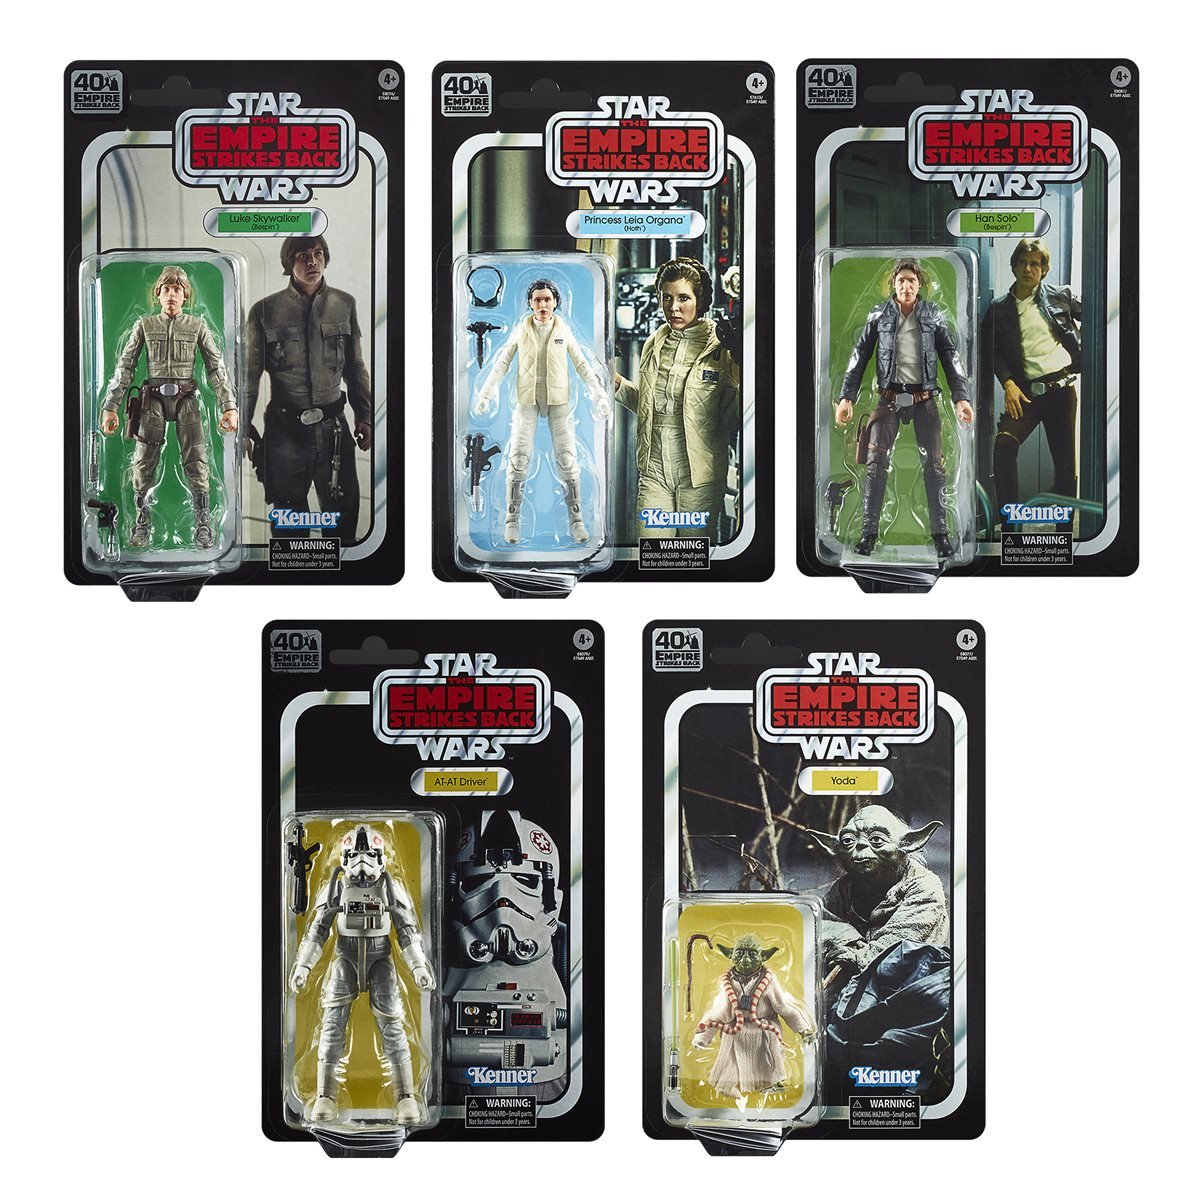 Star Wars Black Series 40th Anniversary 6-Inch Action Figures Complete Set